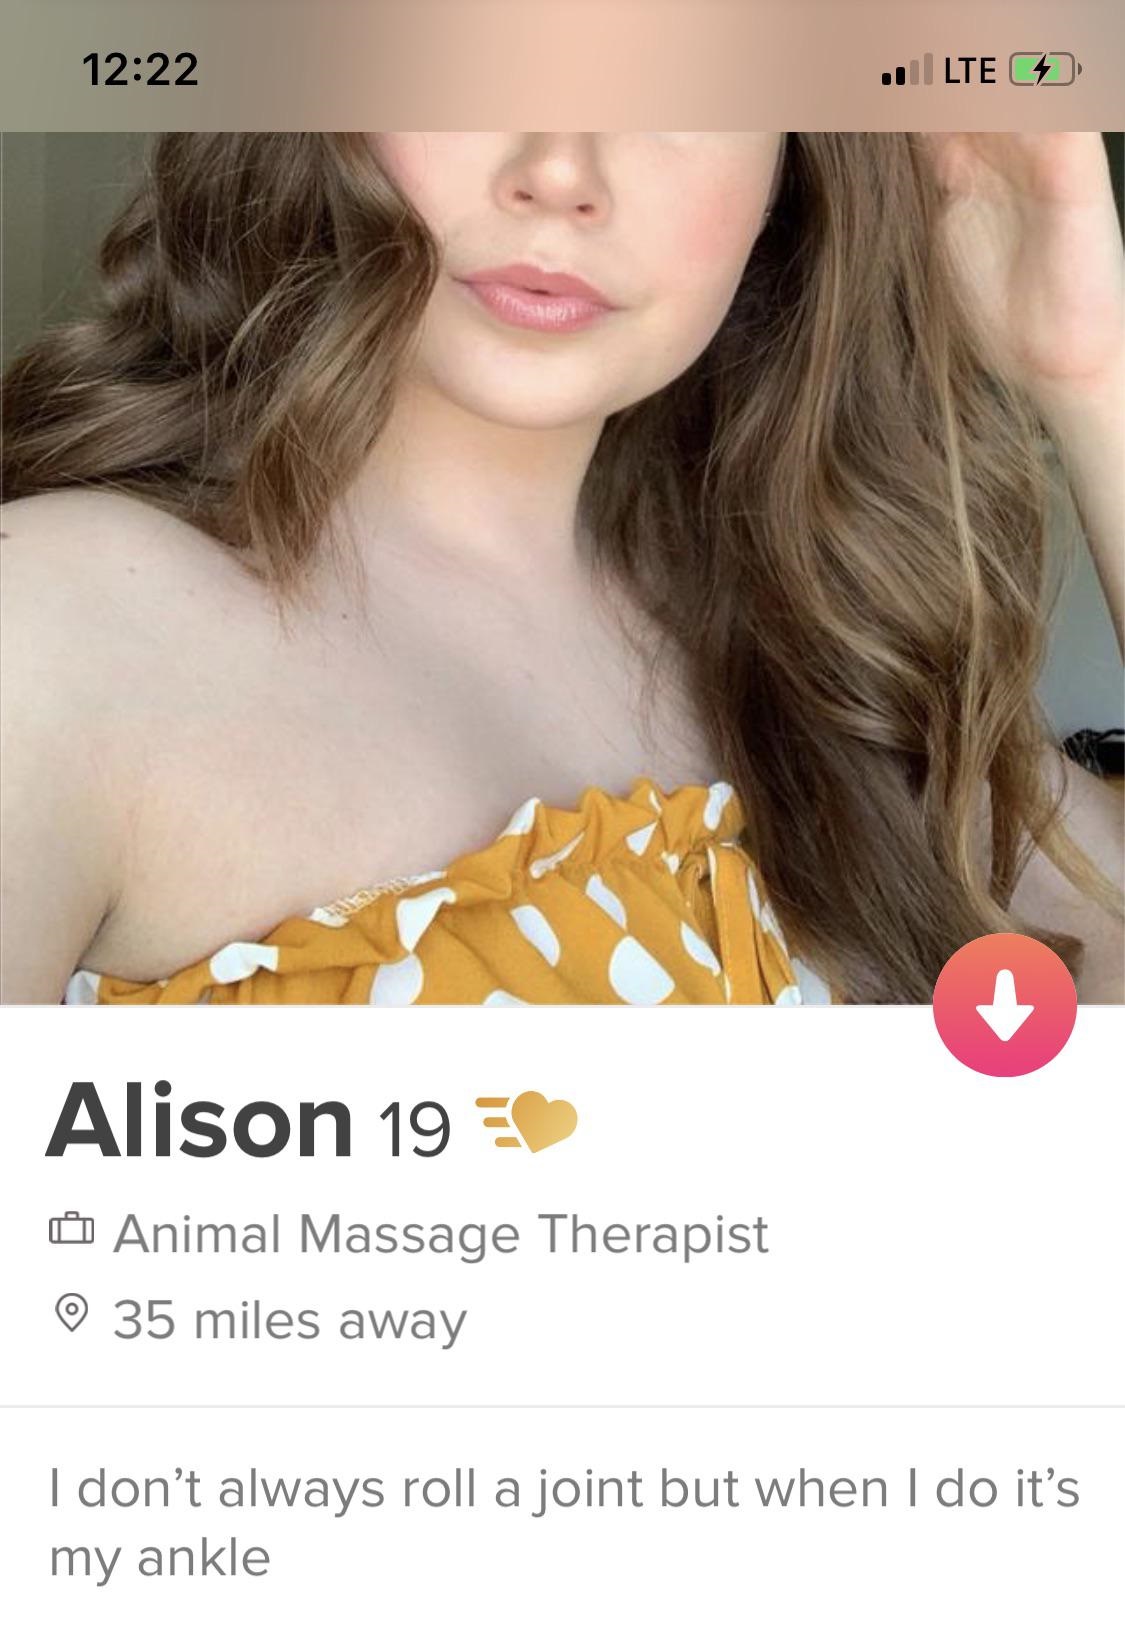 tinder - beauty - 1 Lte 4 Alison 19 Animal Massage Therapist 35 miles away I don't always roll a joint but when I do it's my ankle